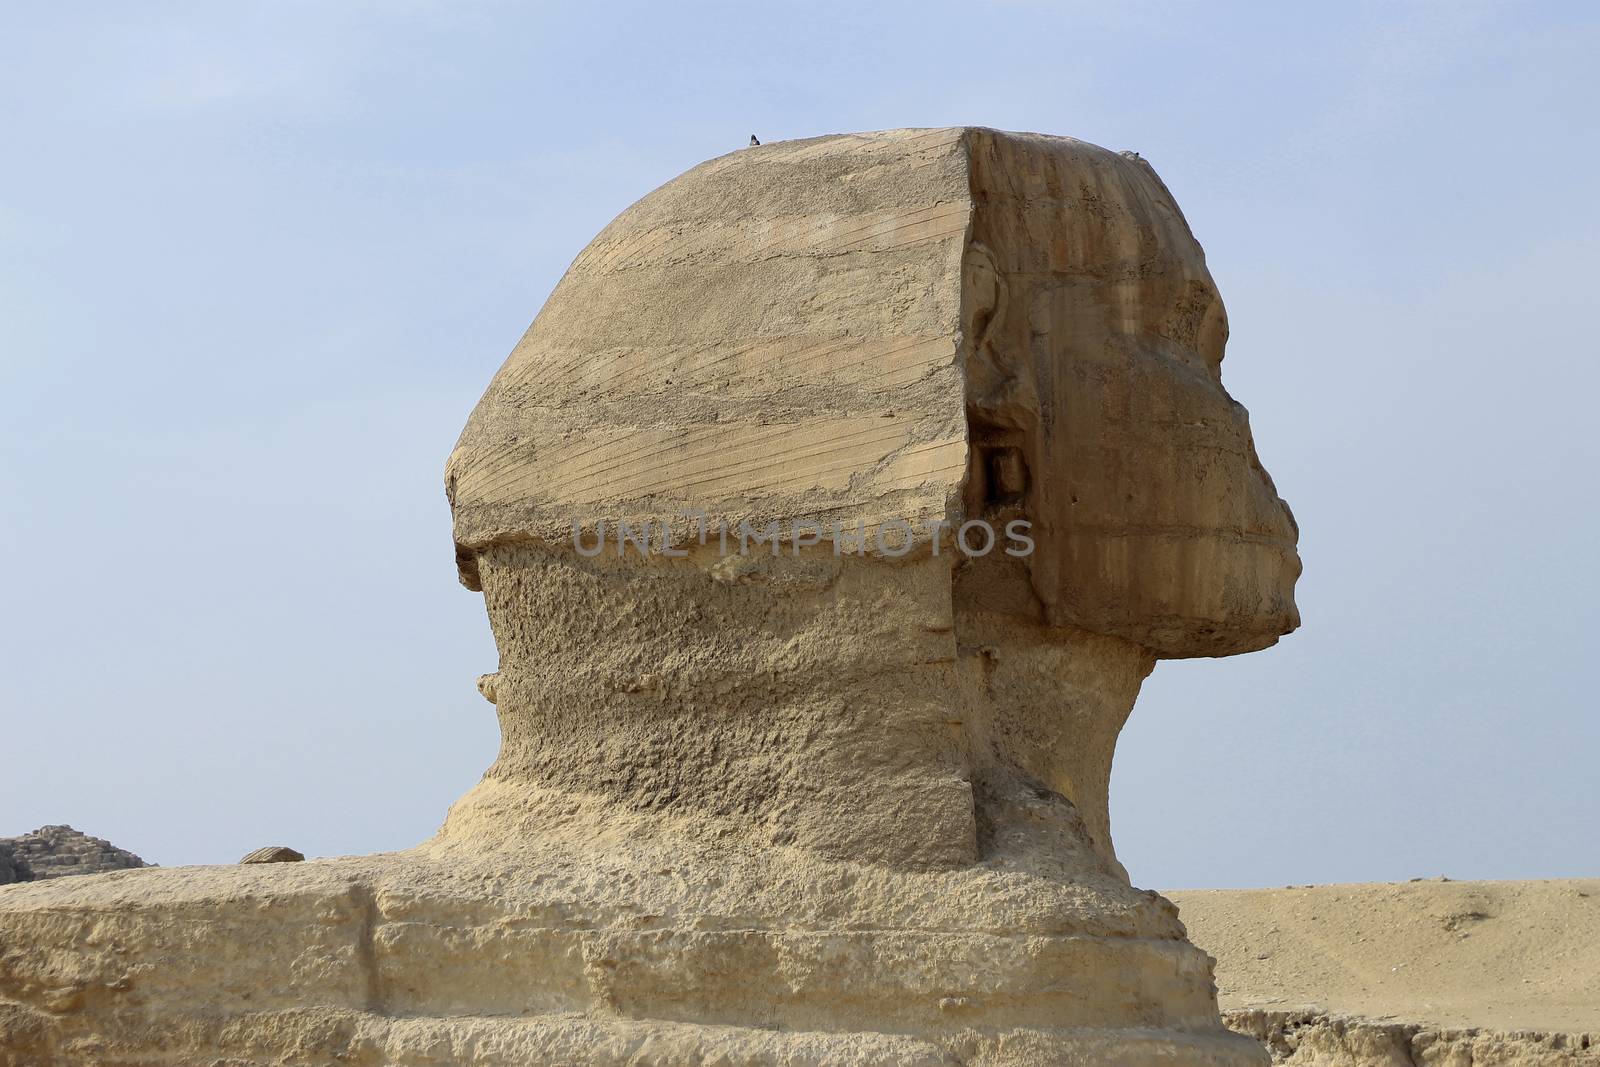 Pyramids In Desert Of Egypt And Sphinx In Giza